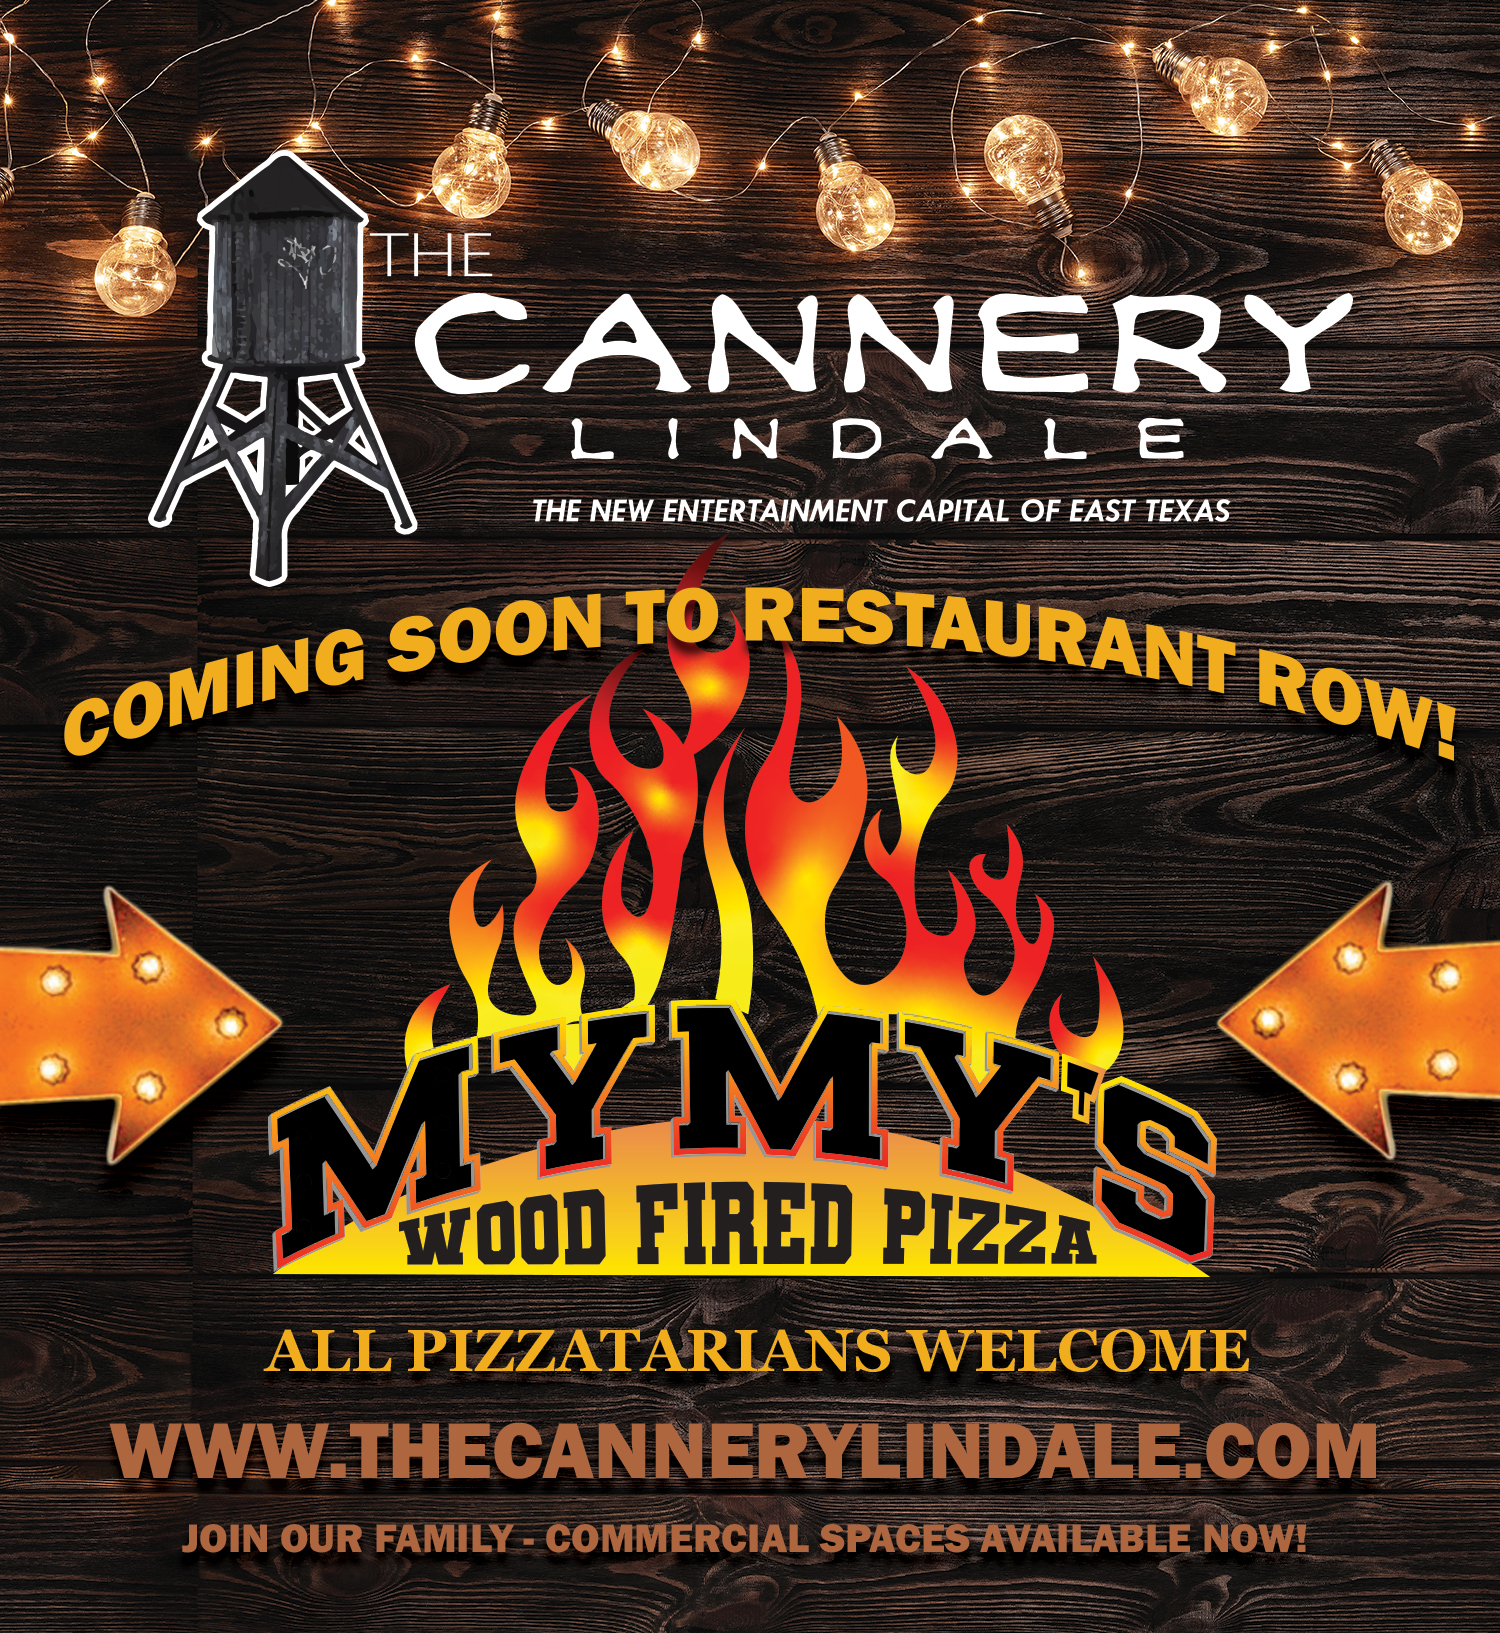 The Cannery Welcomes My My’s Wood Fired Pizza 🍕 to it’s growing list of Restaurant Row Tenants